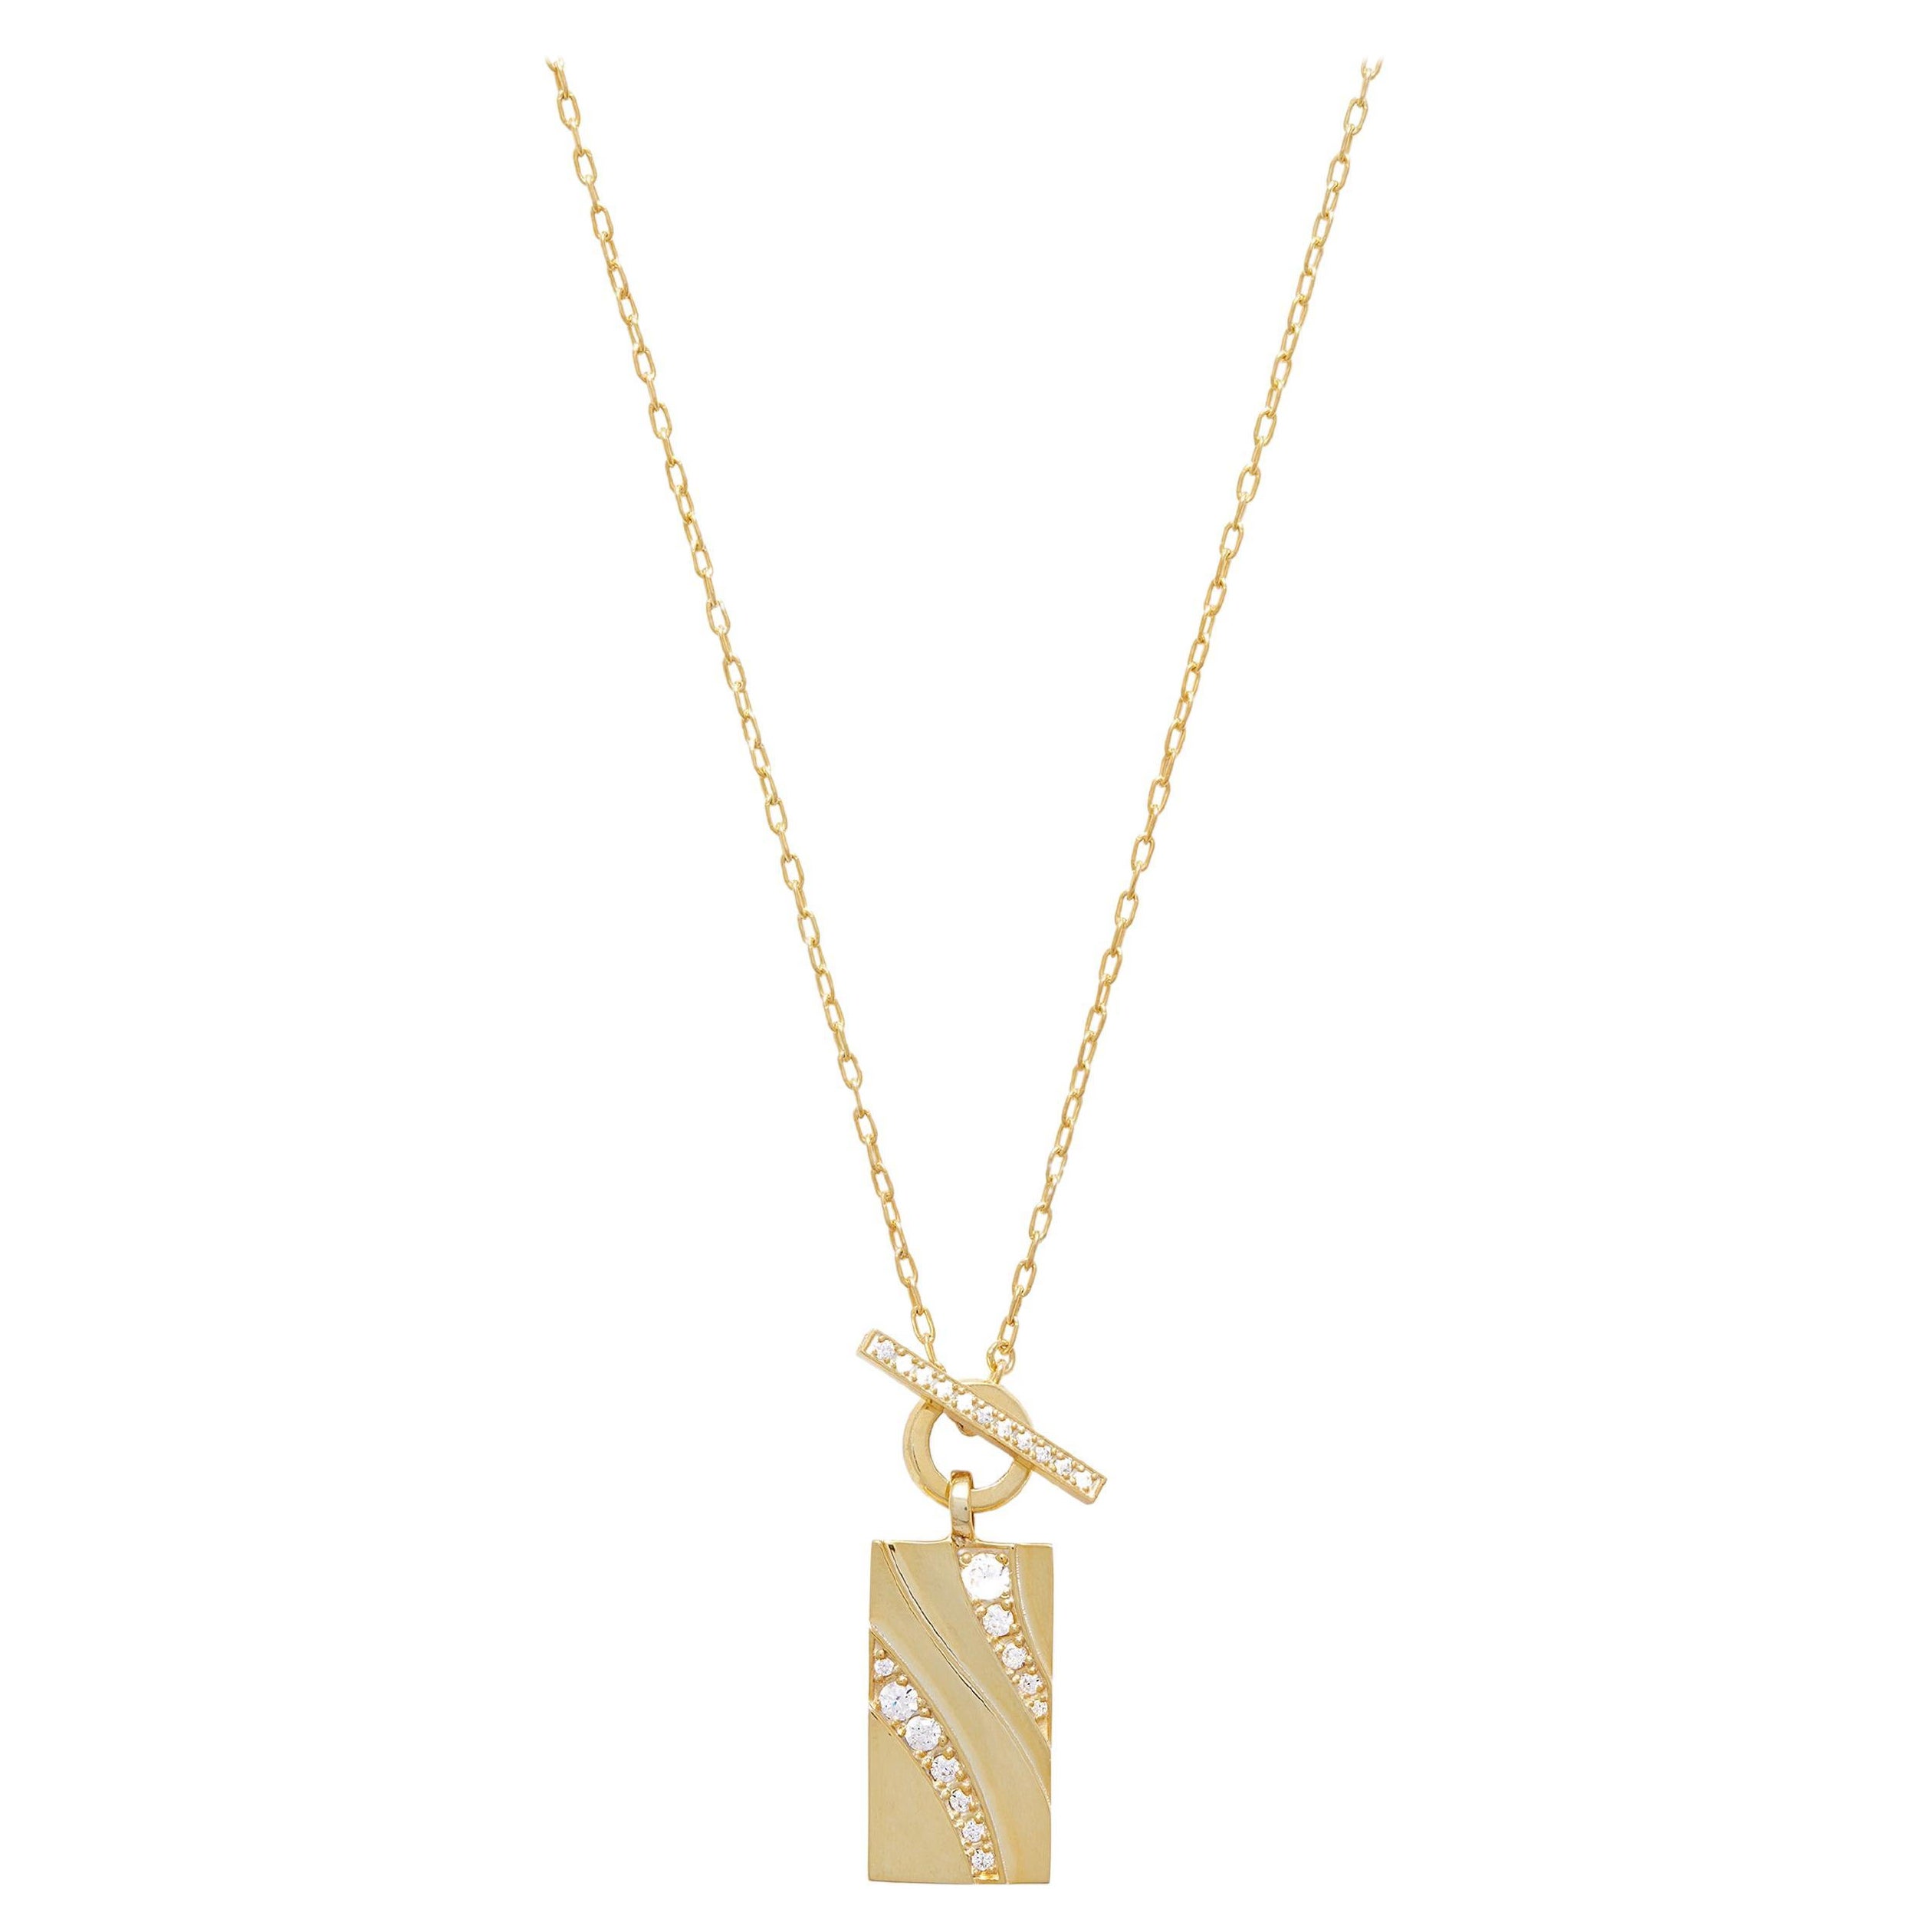 Casey Perez Sculptural 18k gold diamond toggle bar necklace with wave detail For Sale